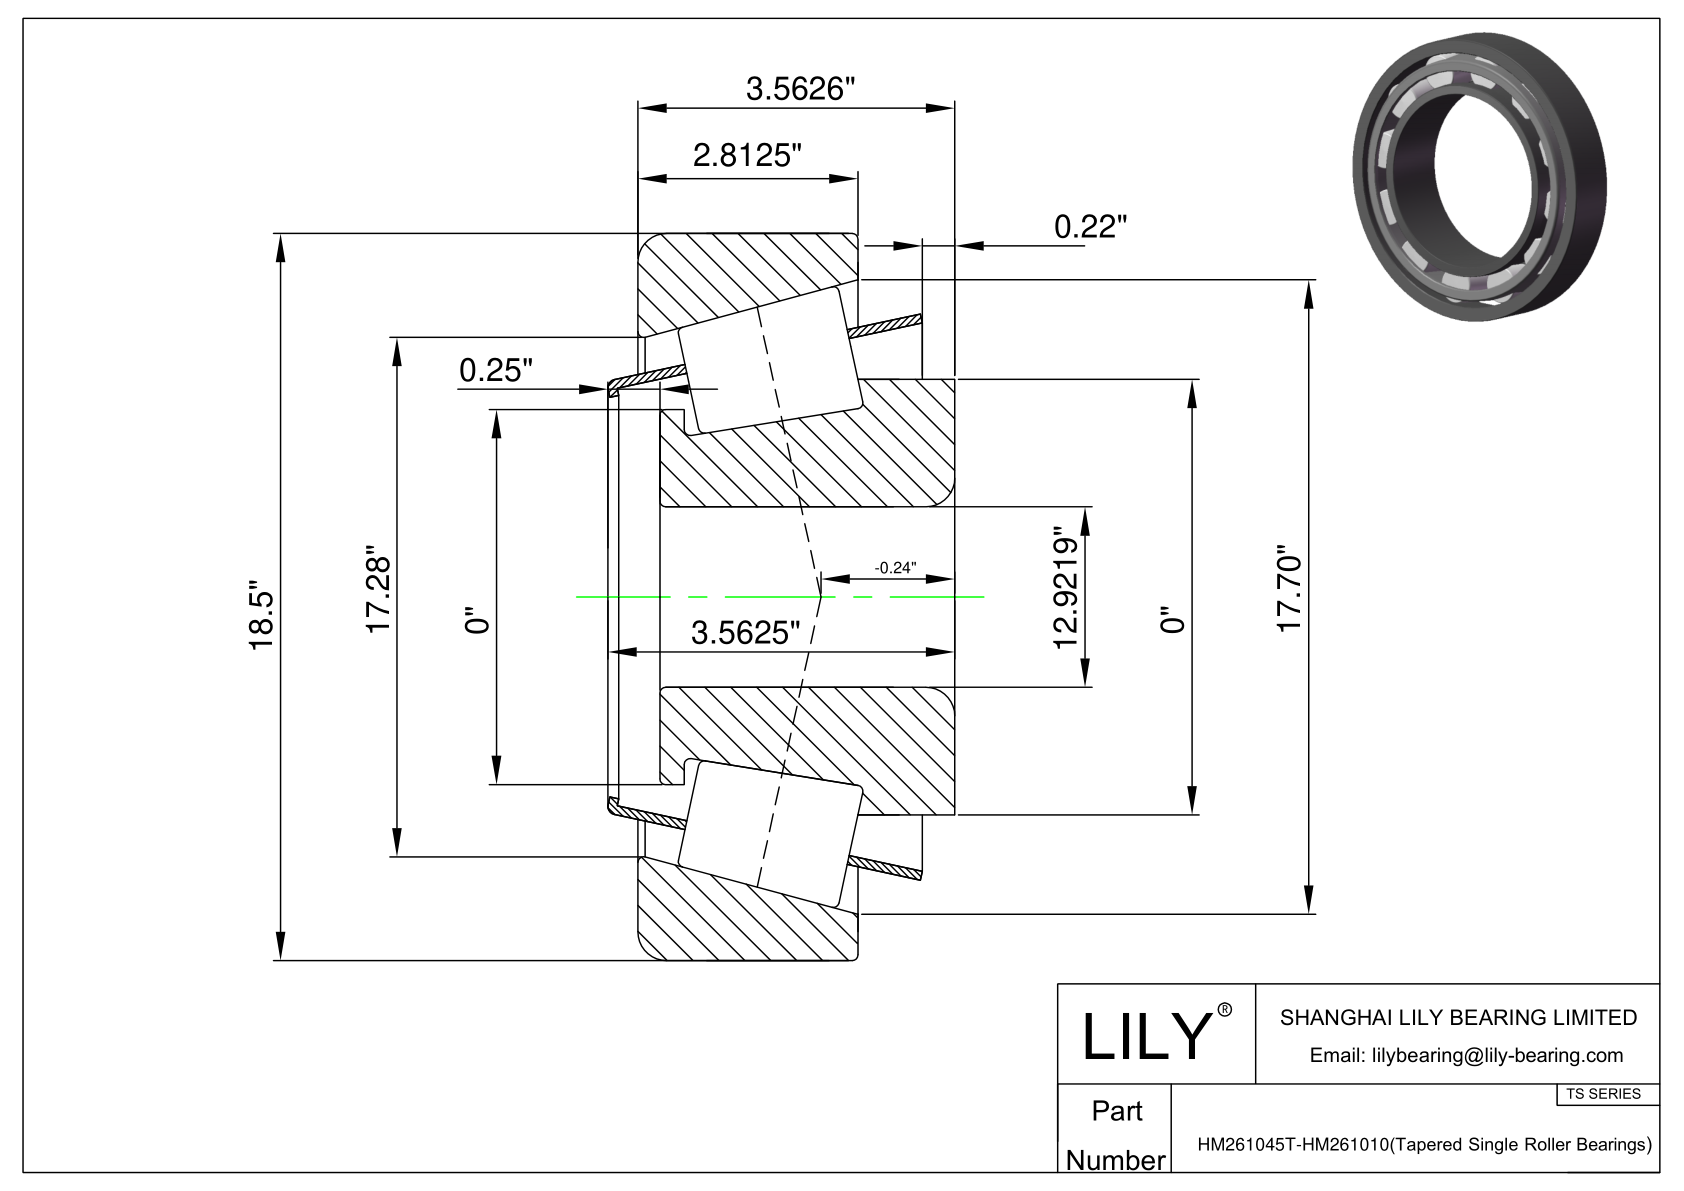 HM261045T-HM261010 TS (Tapered Single Roller Bearings) (Imperial) cad drawing